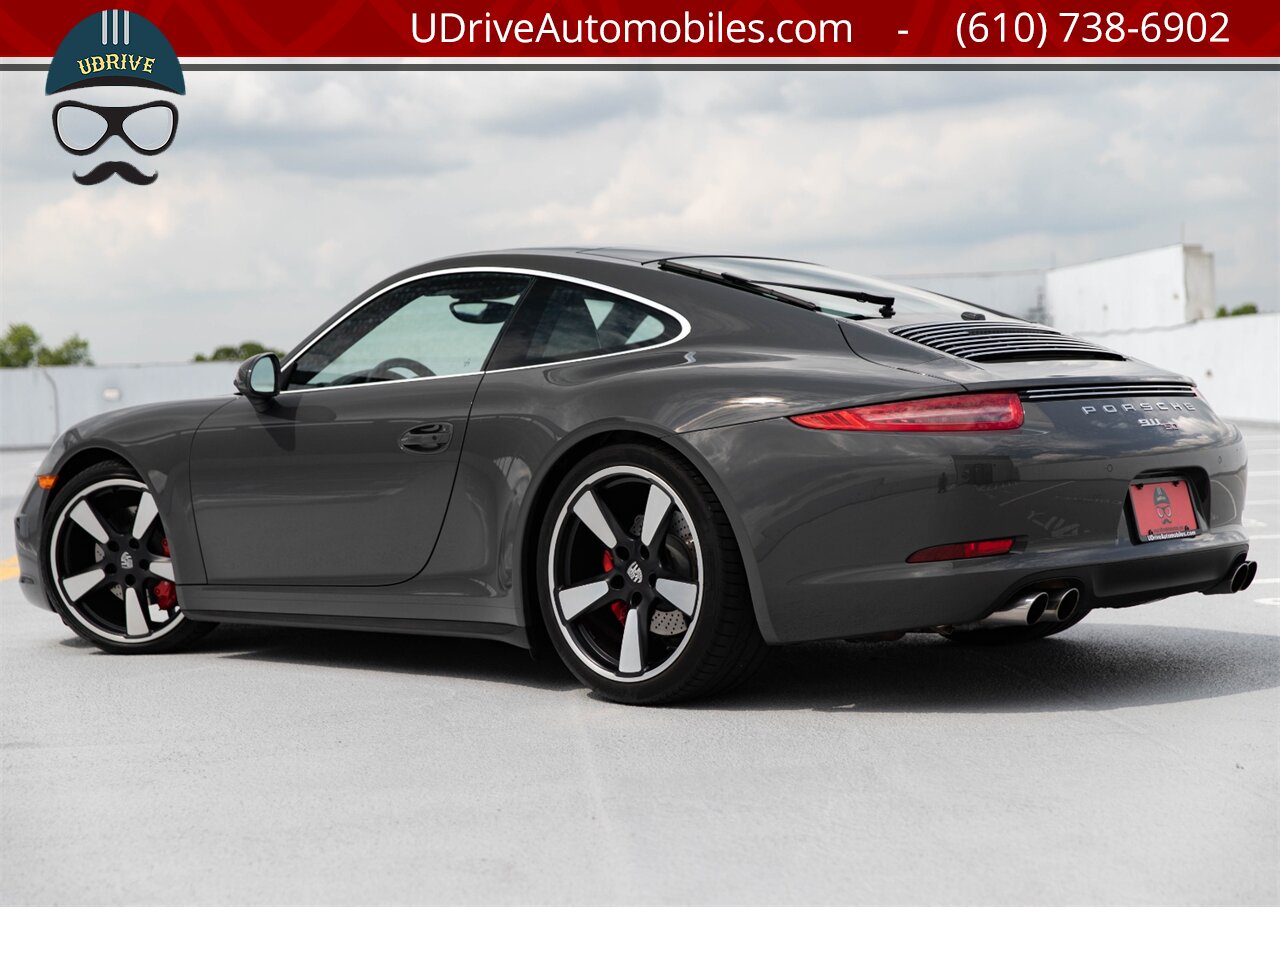 2014 Porsche 911 Carrera S 50th Anniversary Edition Certified  CPO Warranty thru 12/26/21 Full Front End Clear Film - Photo 5 - West Chester, PA 19382